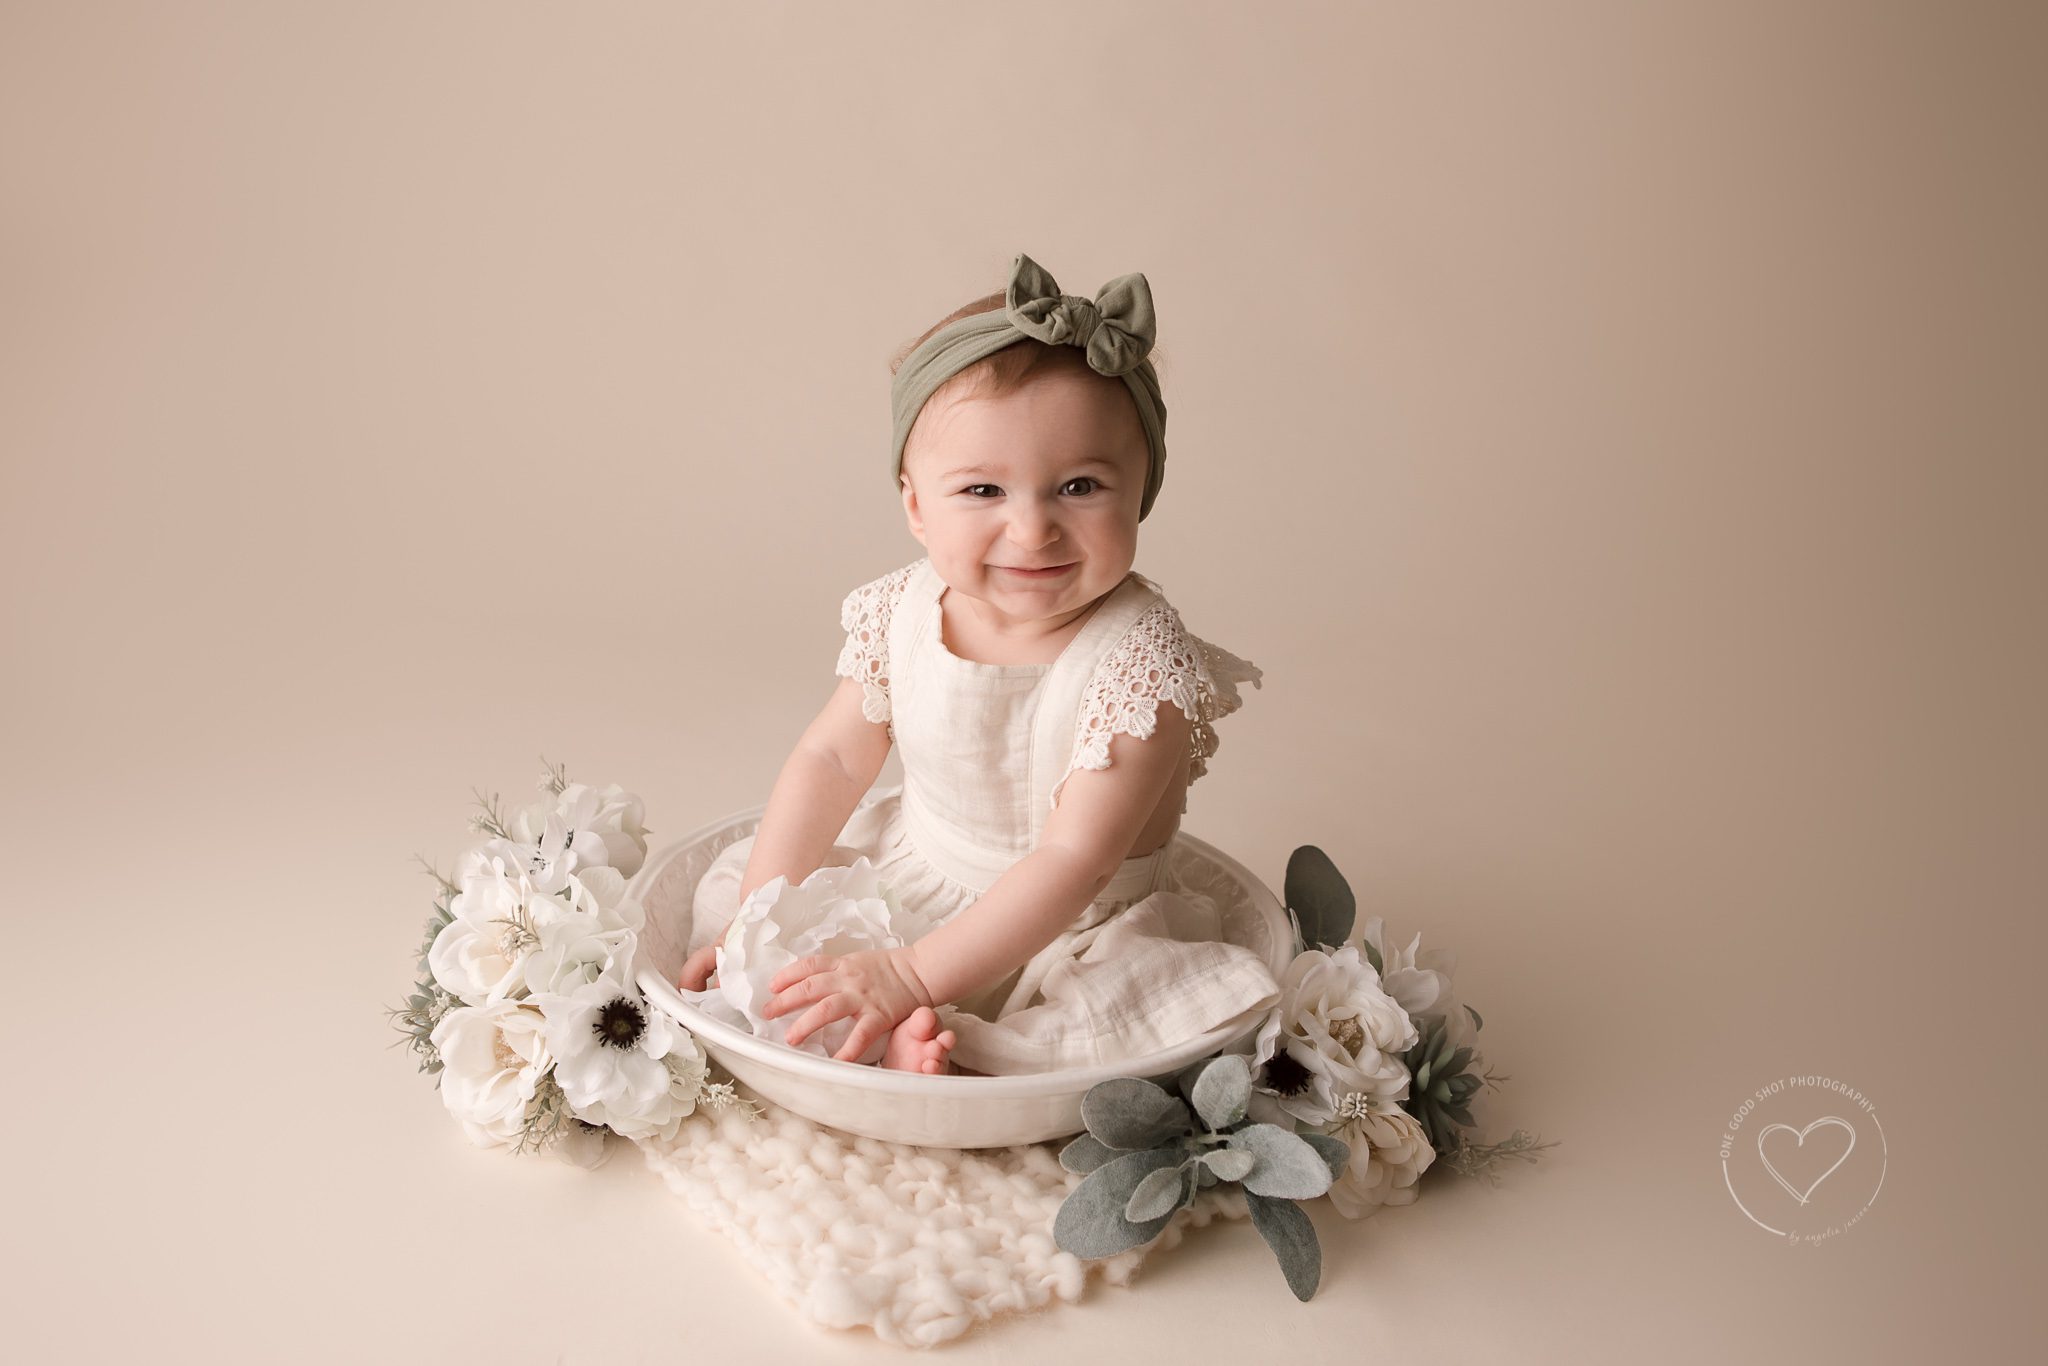 Baby Girl, 6 Months, Sitter Session, Baby wearing white linen dress and a green bow sitting in a bowl with flowers smiling at the camera